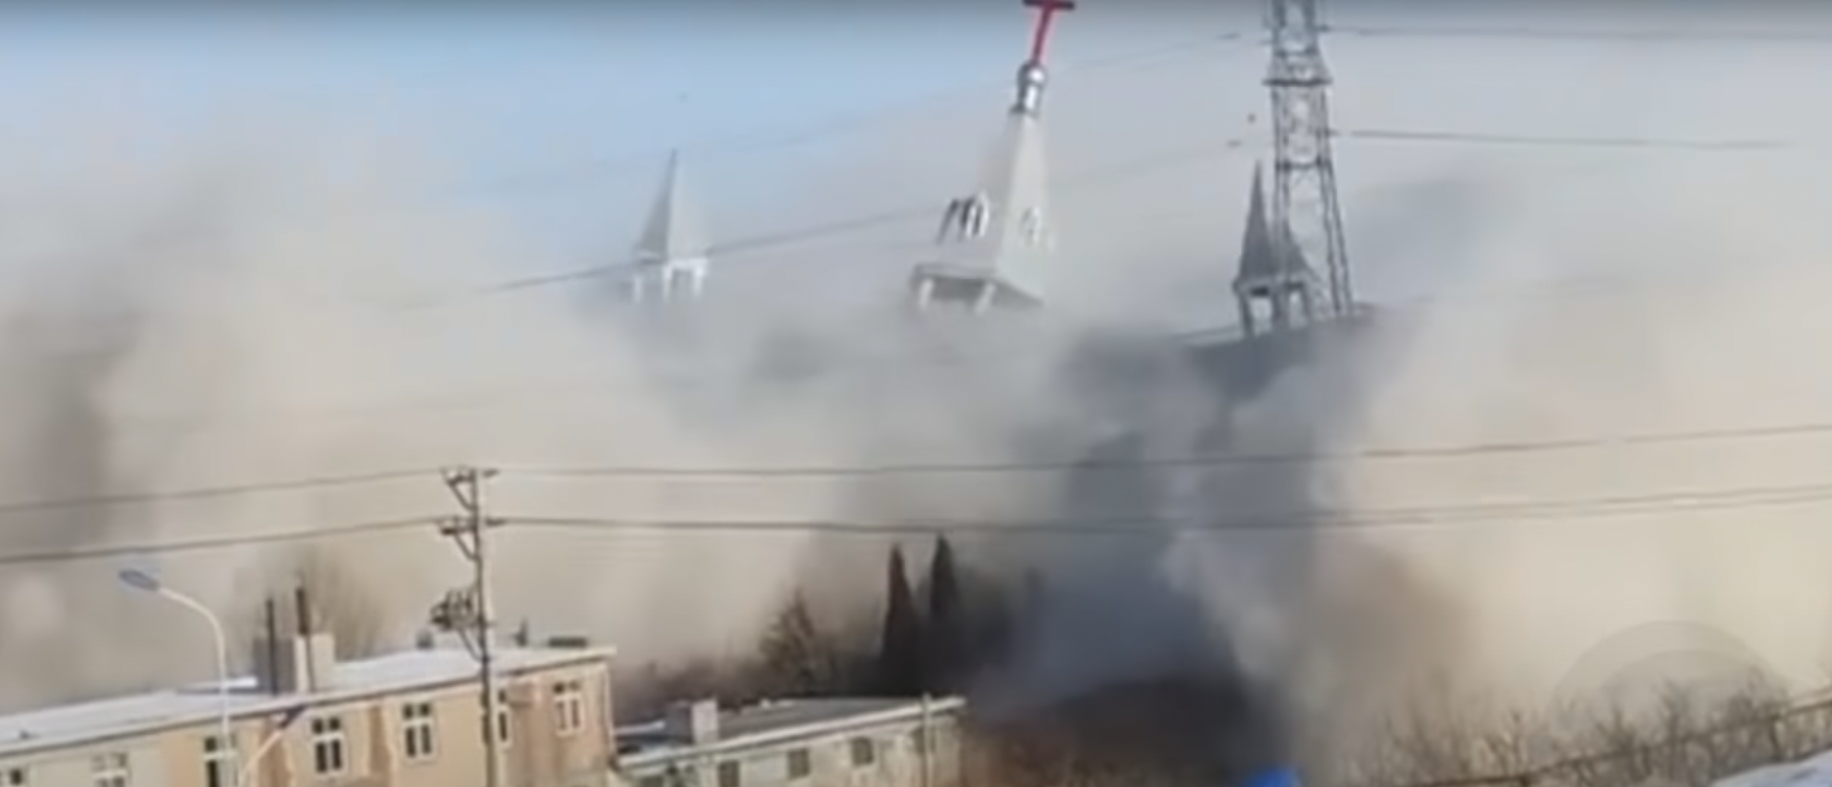 Golden Lampstand Church, one of the largest Protestant churches in Shanxi province, was destroyed in 2018 after being accused of violating land agreements and building codes, according to the South China Morning Post. [YouTube/Screenshot/SouthChinaMorningPost]